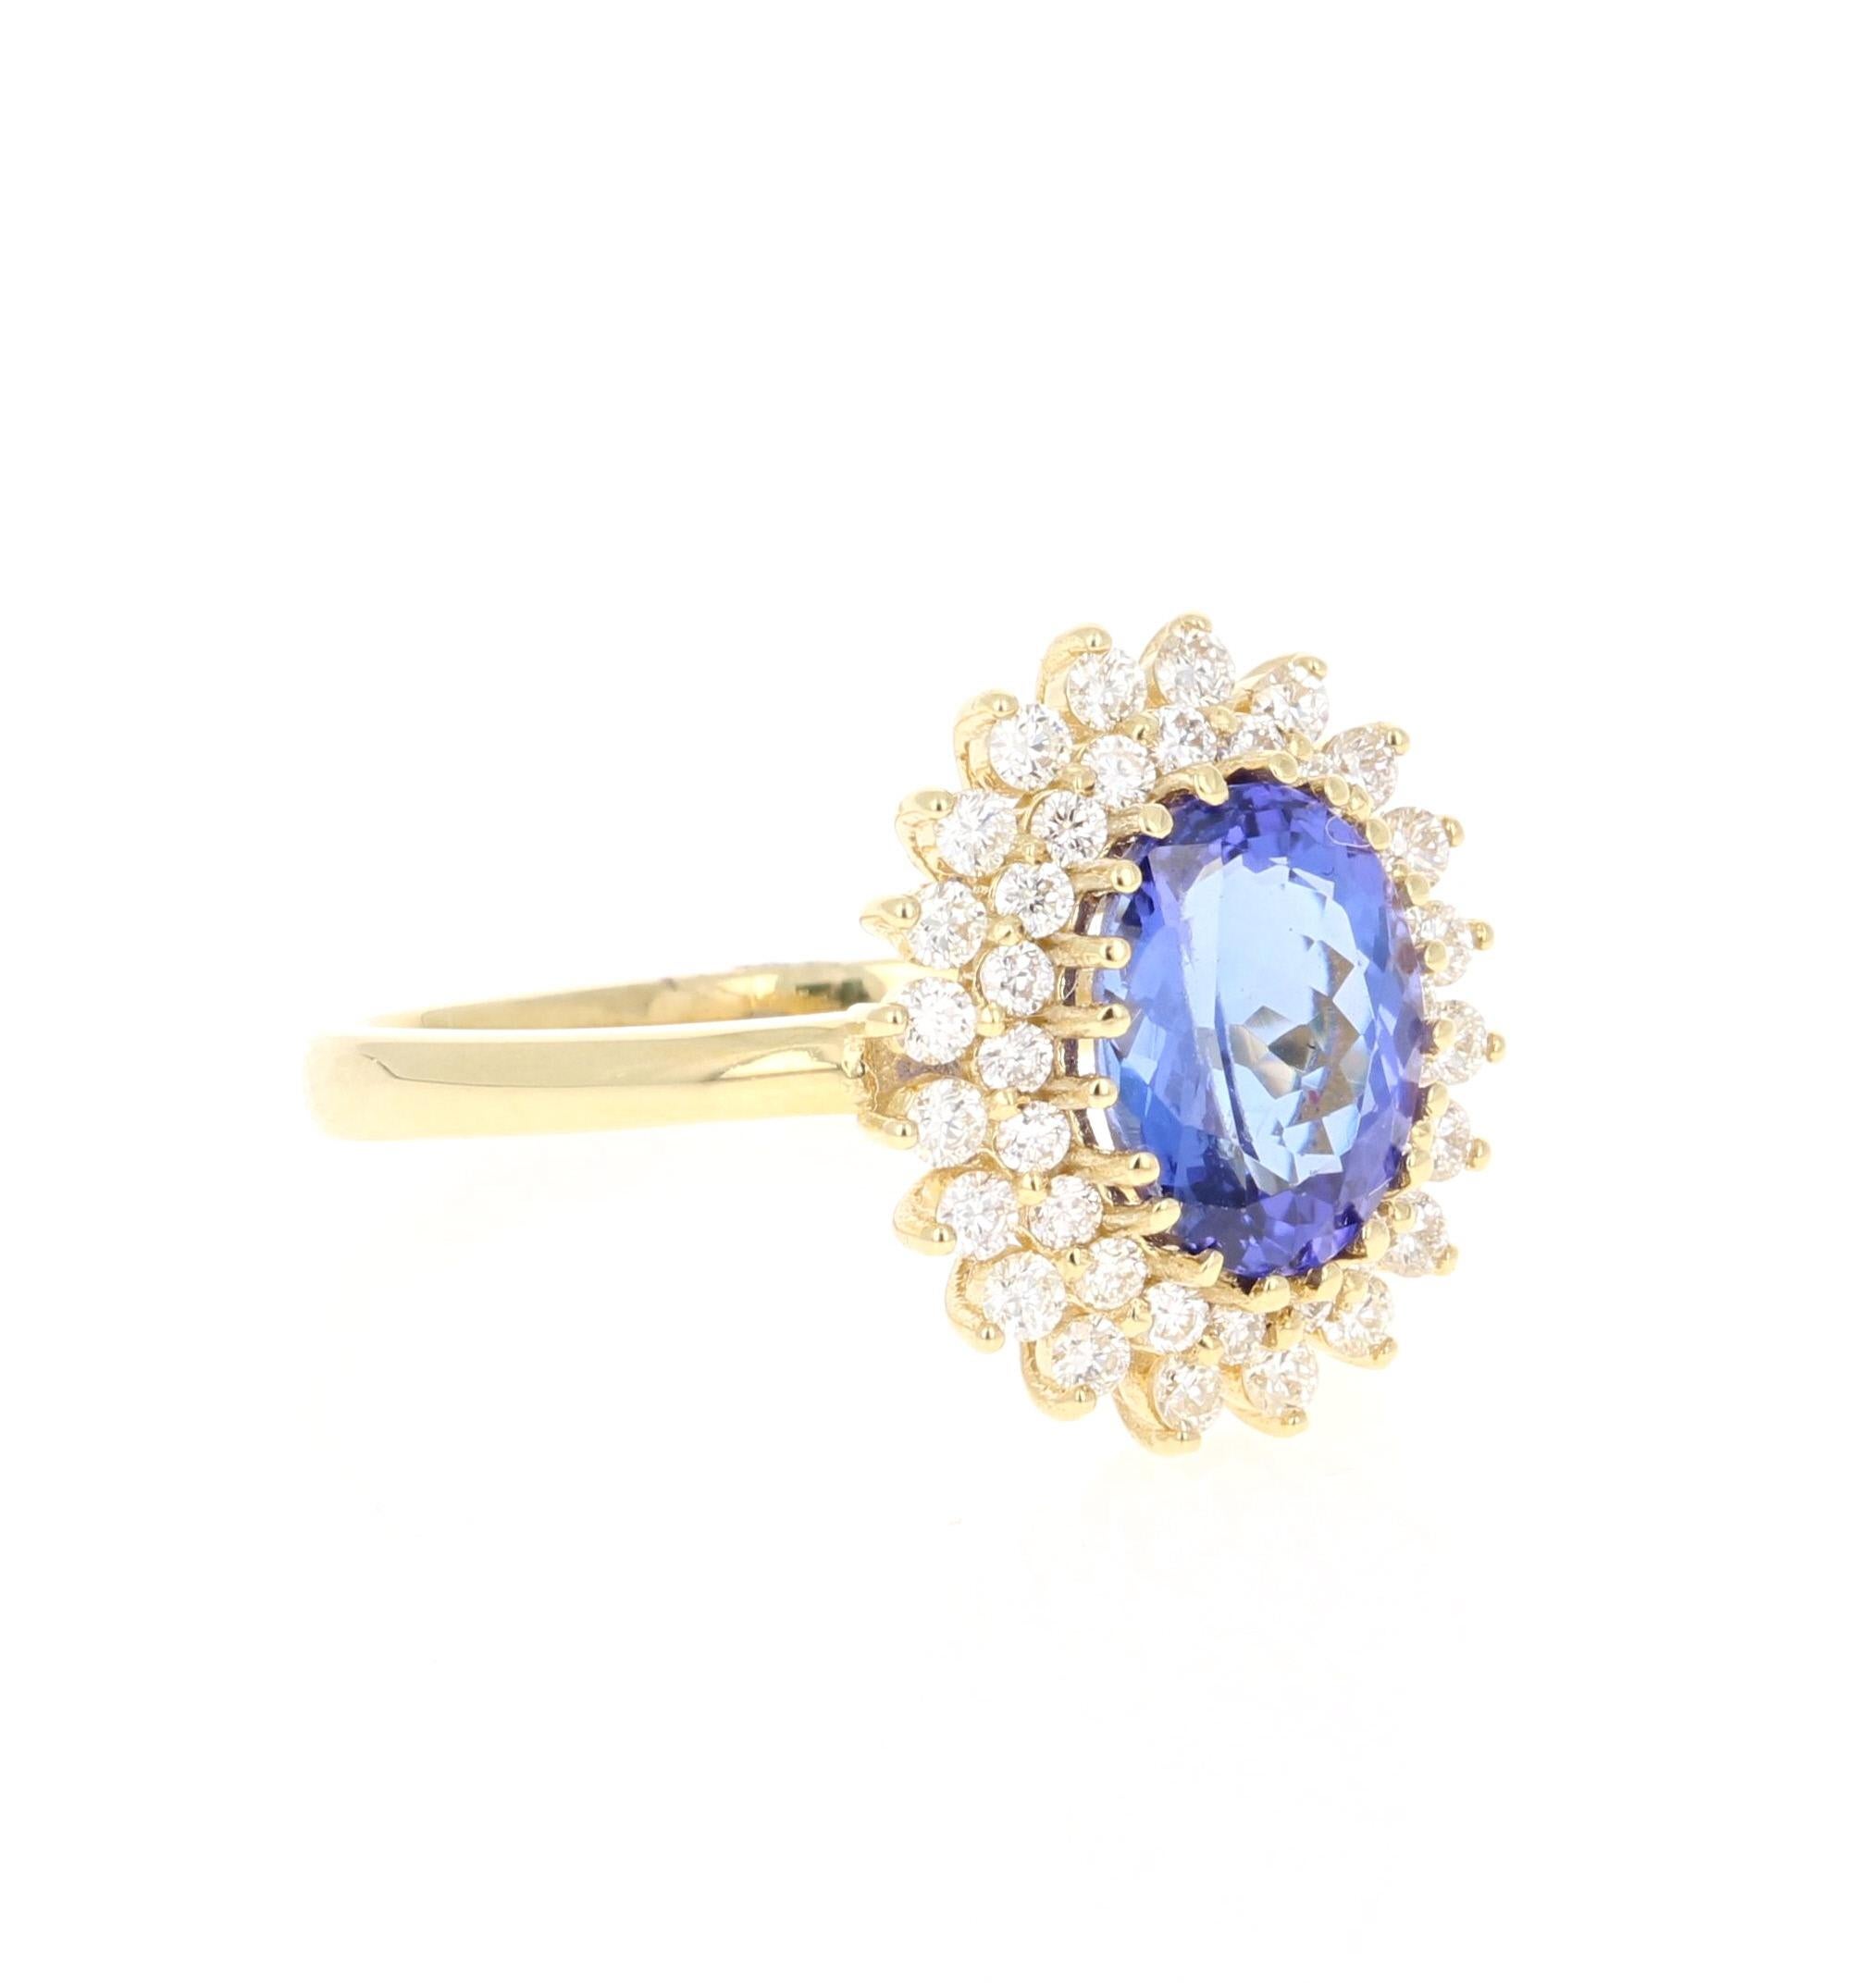 This beautiful ring has a vivid 1.87 Carat Oval Cut Tanzanite. The Tanzanite is surrounded by 40 Round Cut Diamonds that weigh 0.53 carats. (Clarity: VS, Color: H) The total carat weight of the ring is 2.40 carats. 

The ring is made in 18K Yellow